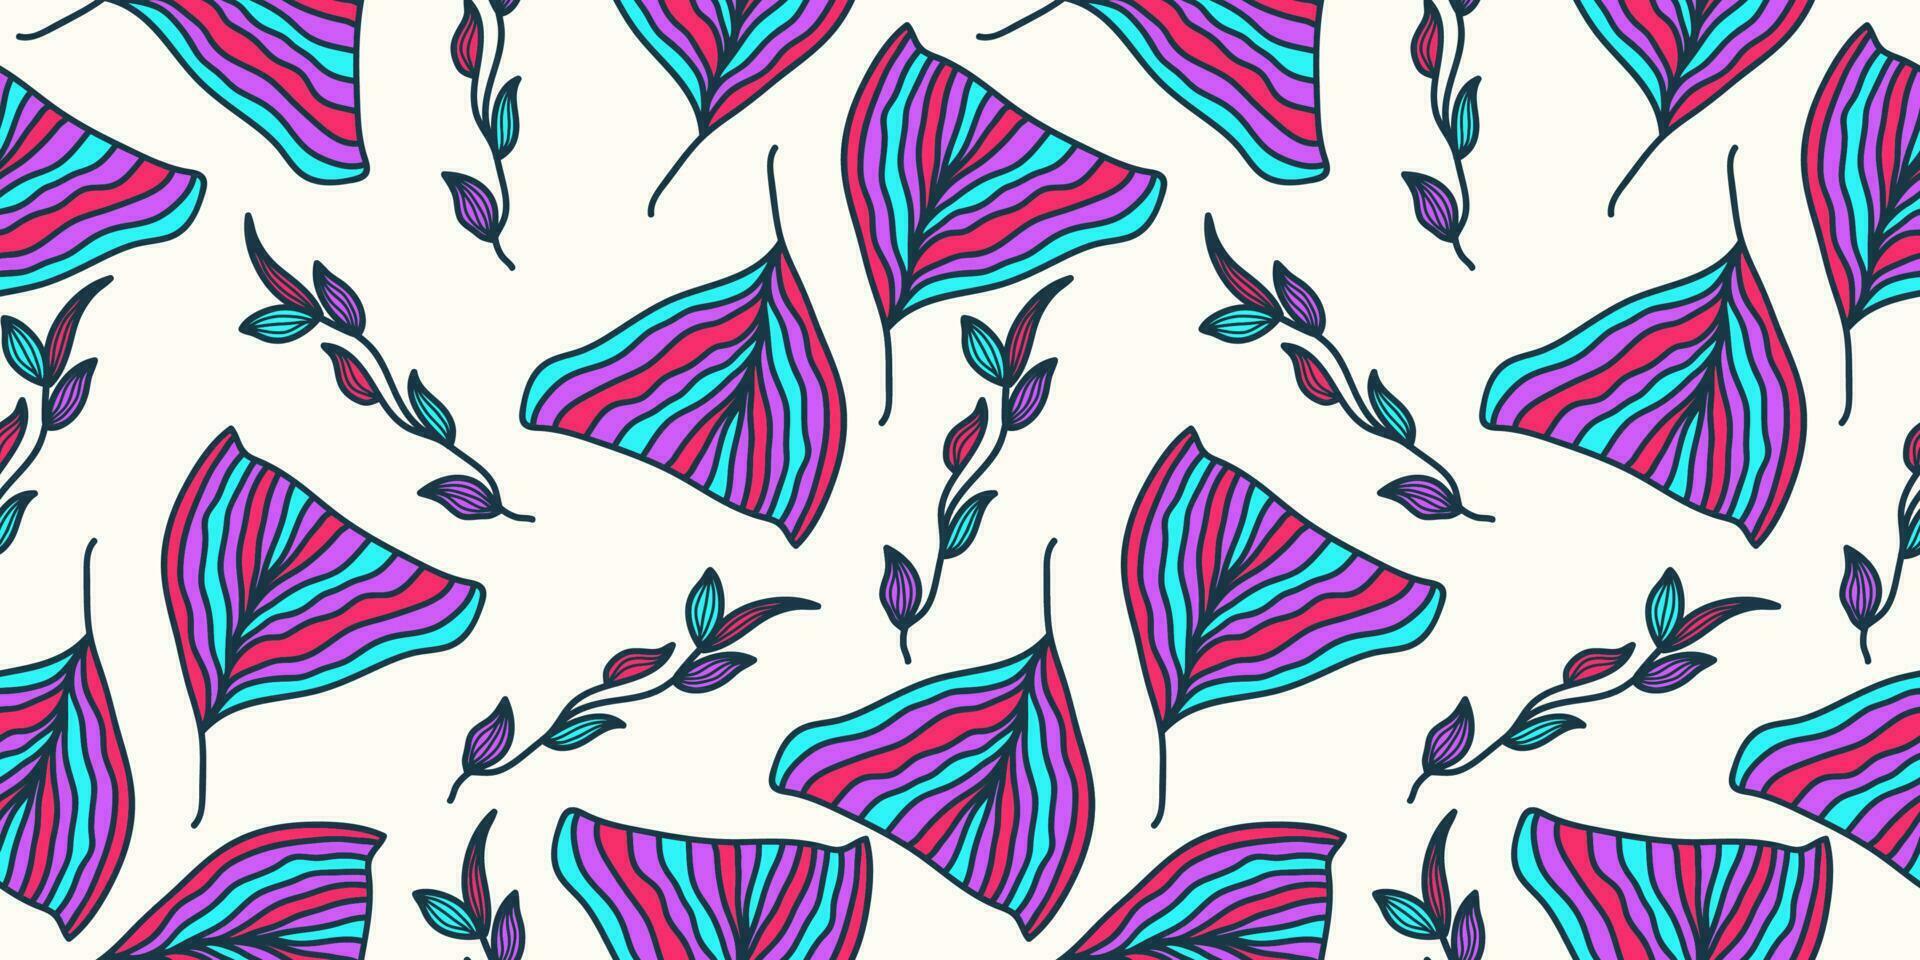 Colorful Seamless Floral Pattern with Hand Drawn Style. Flower Motif for Fashion, Wallpaper, Wrapping Paper, Background, Fabric, Textile, Apparel, and Card Design vector